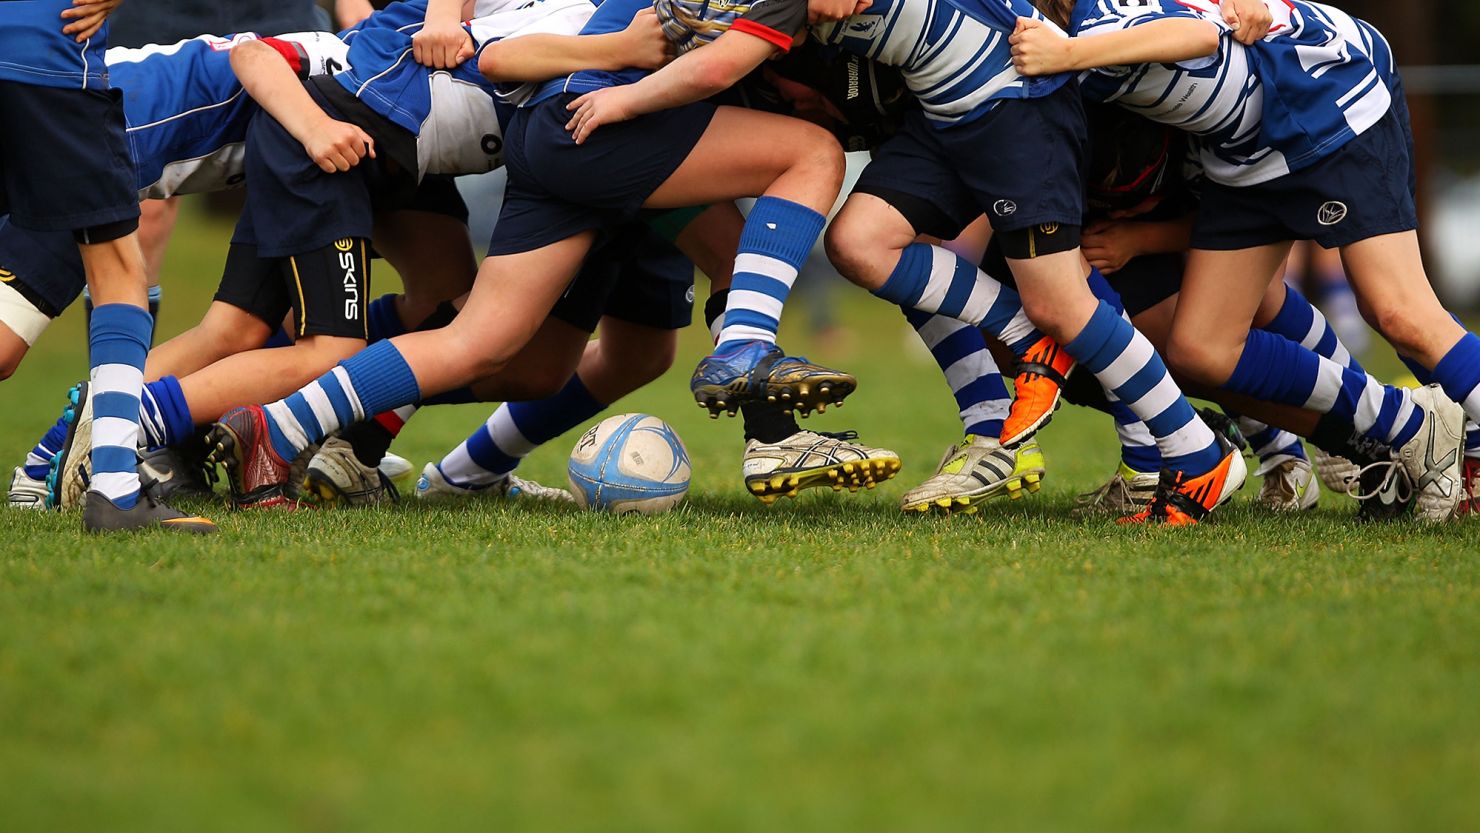 A new study said children playing rugby amounts to child abuse.